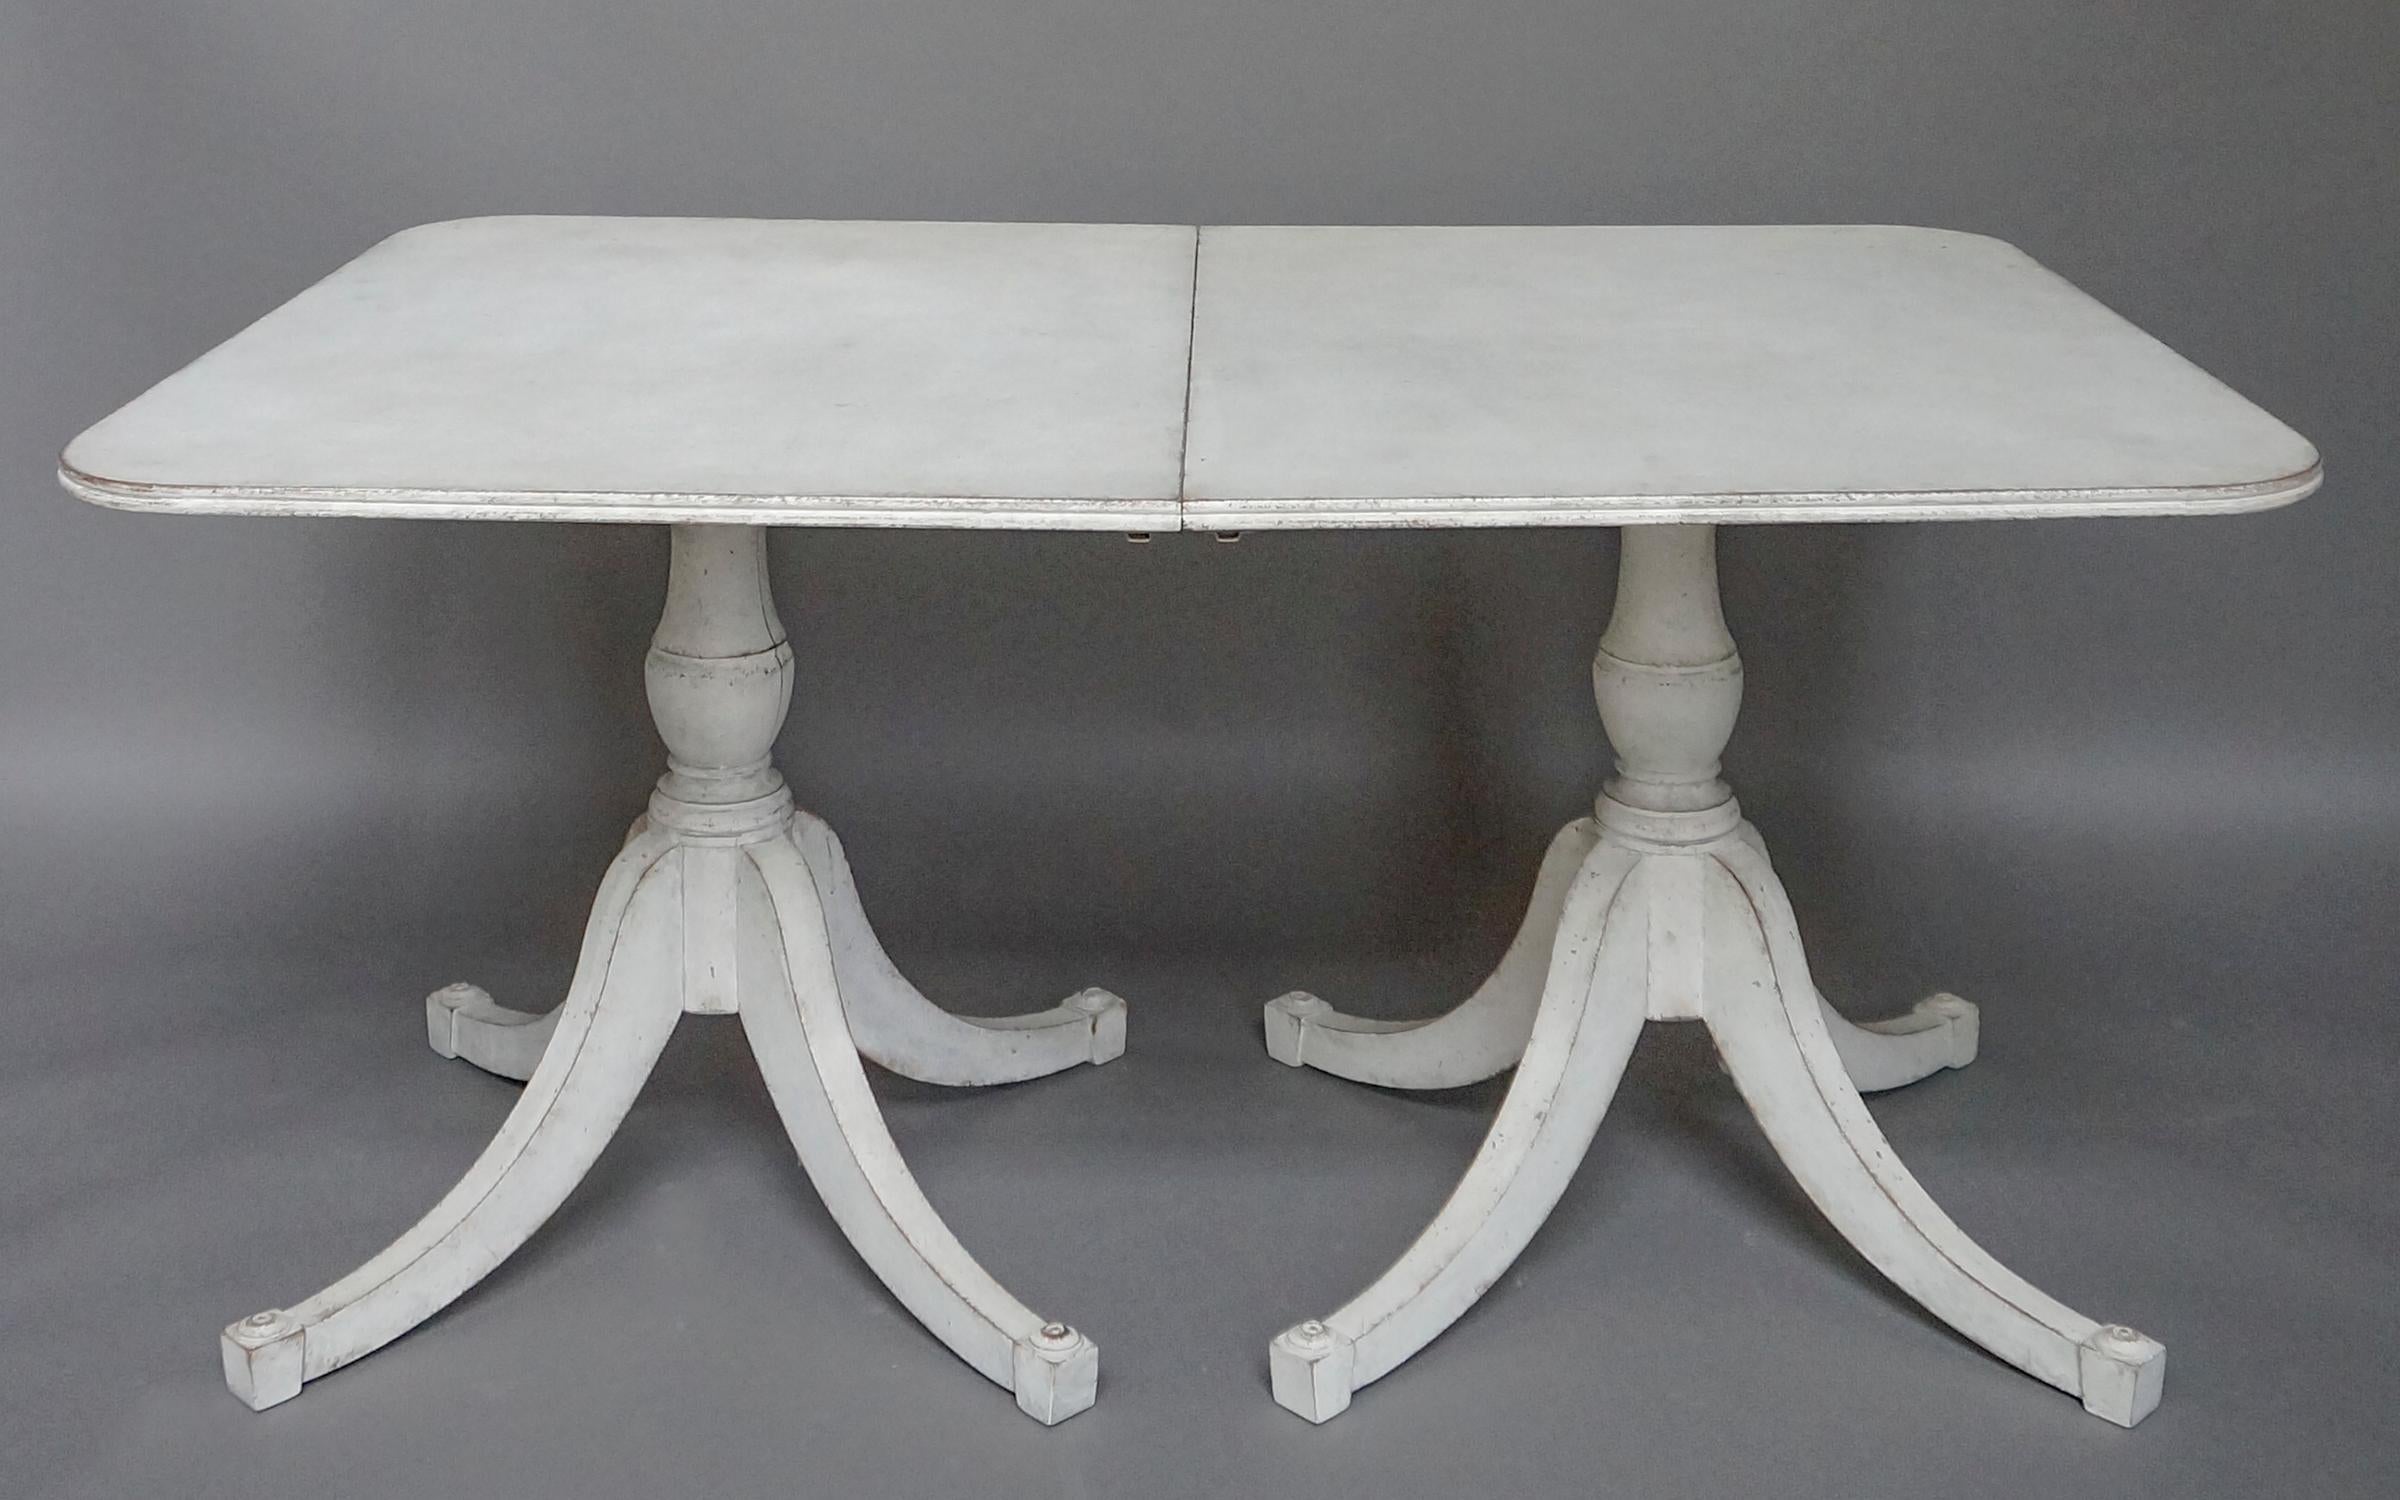 Dining table, Sweden, circa 1860, composed of two connecting console tables. Pedestal bases with four curved legs, each finished with an applied roundel. A rare form.